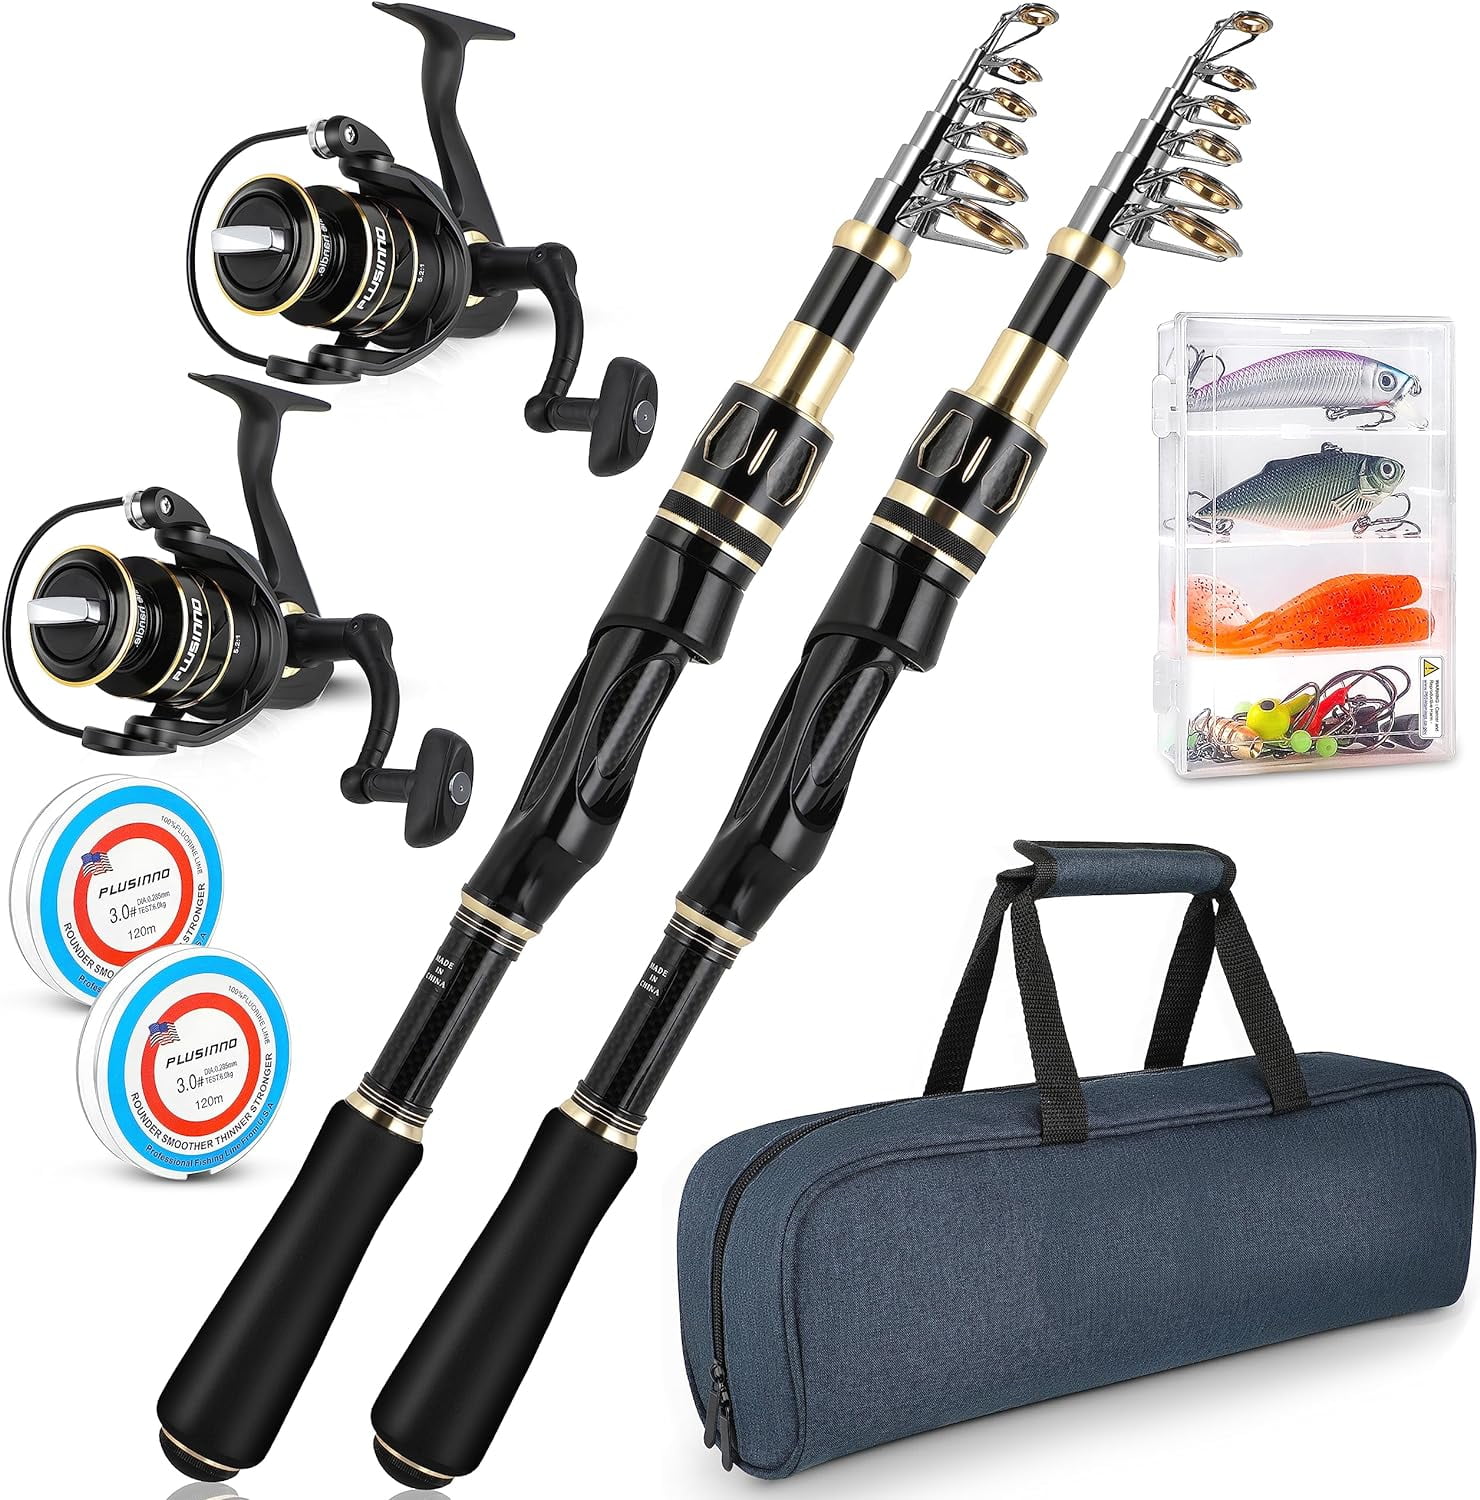 Ugly Stik 5' GX2 Travel Fishing Rod and Reel Spinning Combo